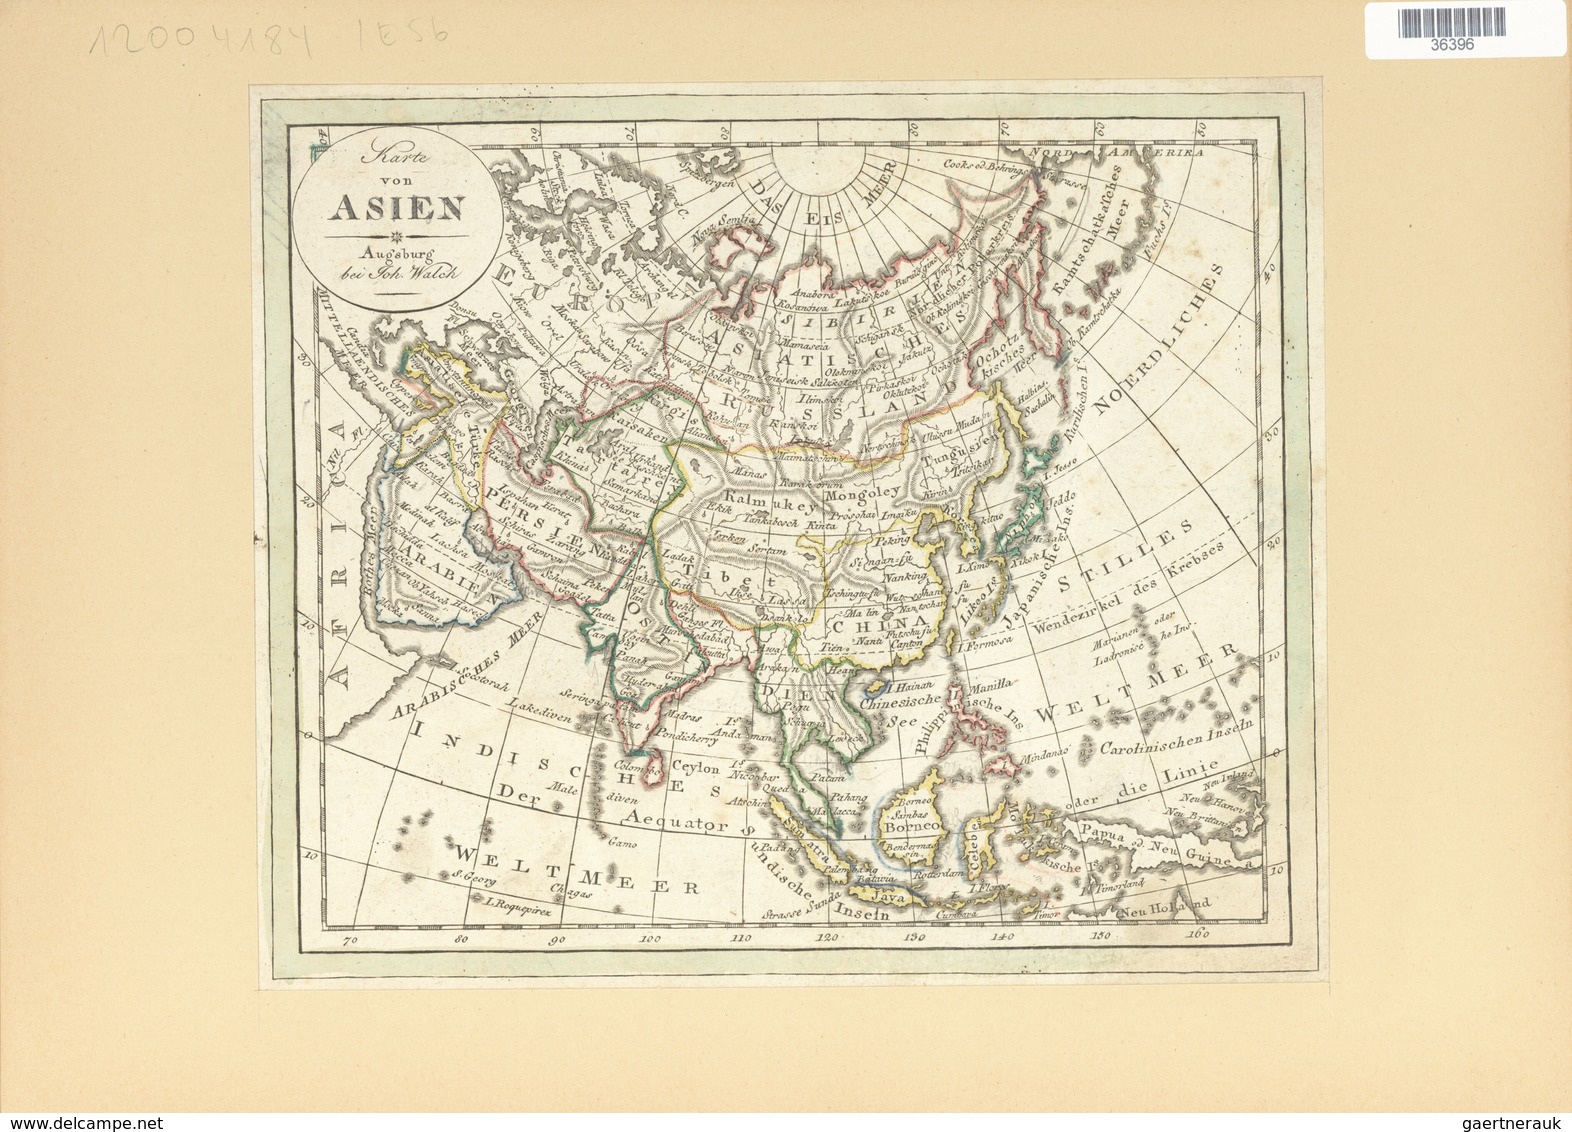 Landkarten Und Stiche: 1797. Map Of Asia From Russia To China, Korea, Japan, Indonesia, India, Phili - Géographie